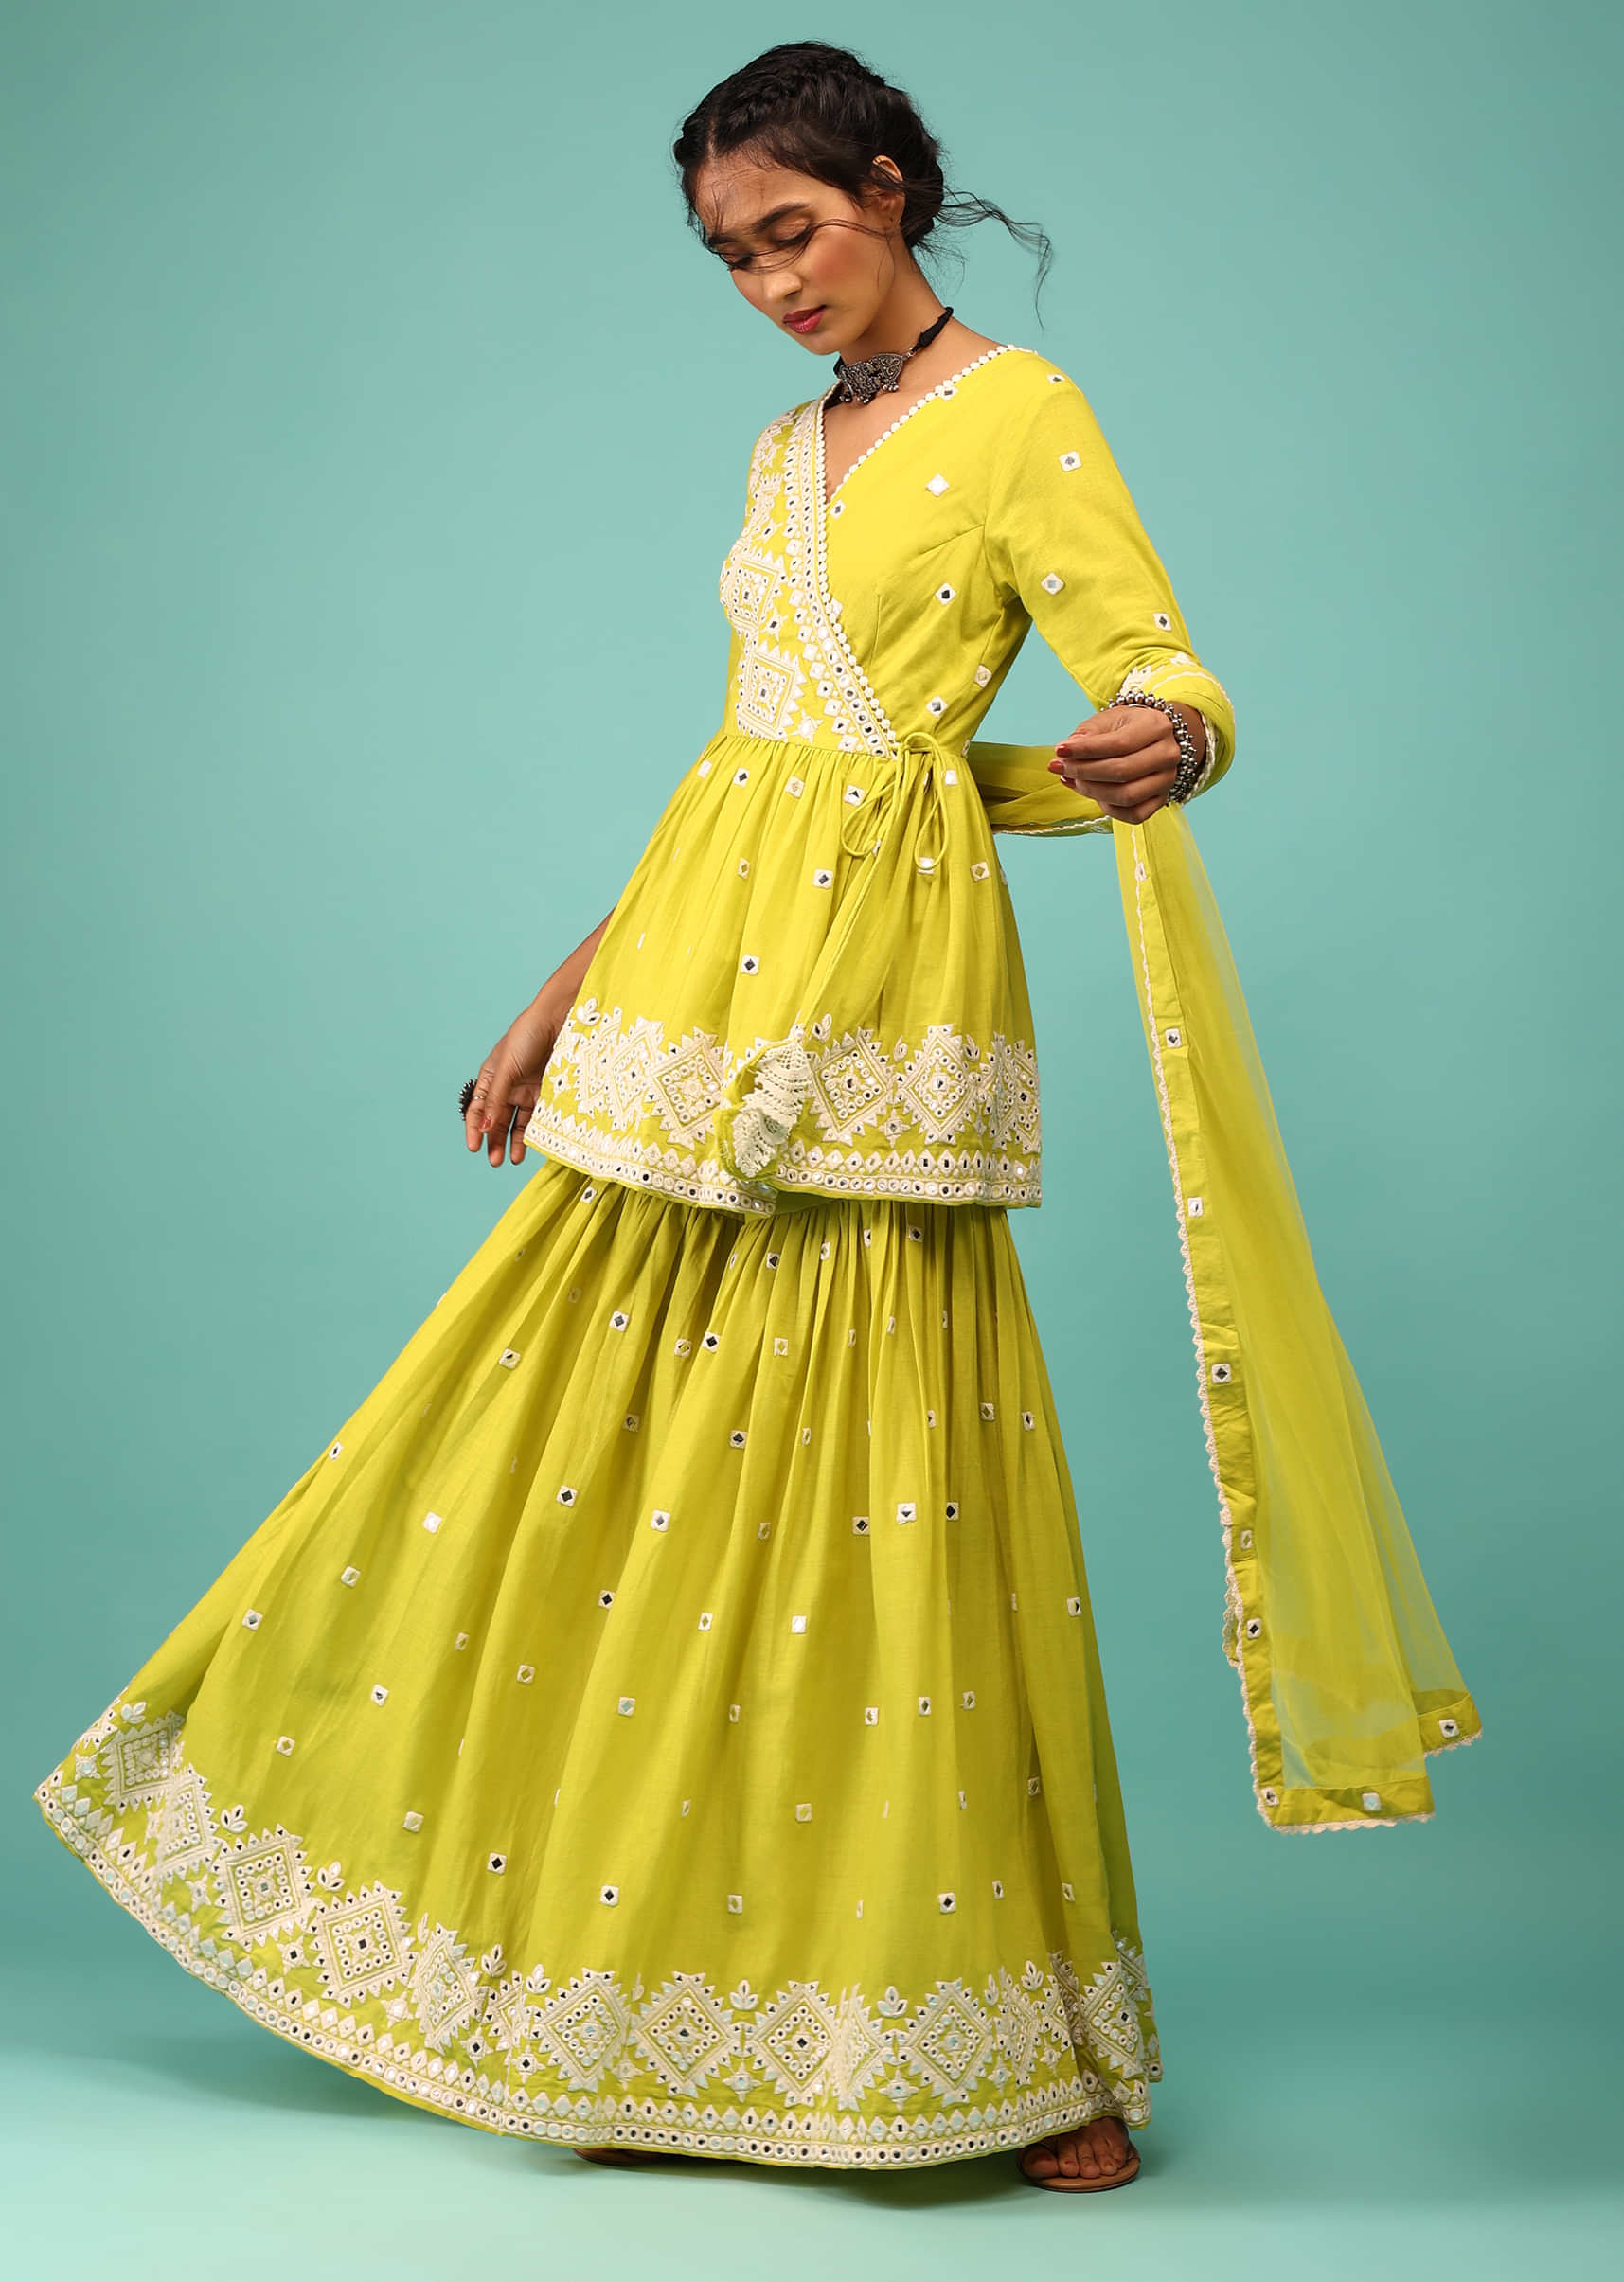 Green Sheen Sharara Suit In Cotton With Angarakha Peplum Top & Lucknowi Embroidery